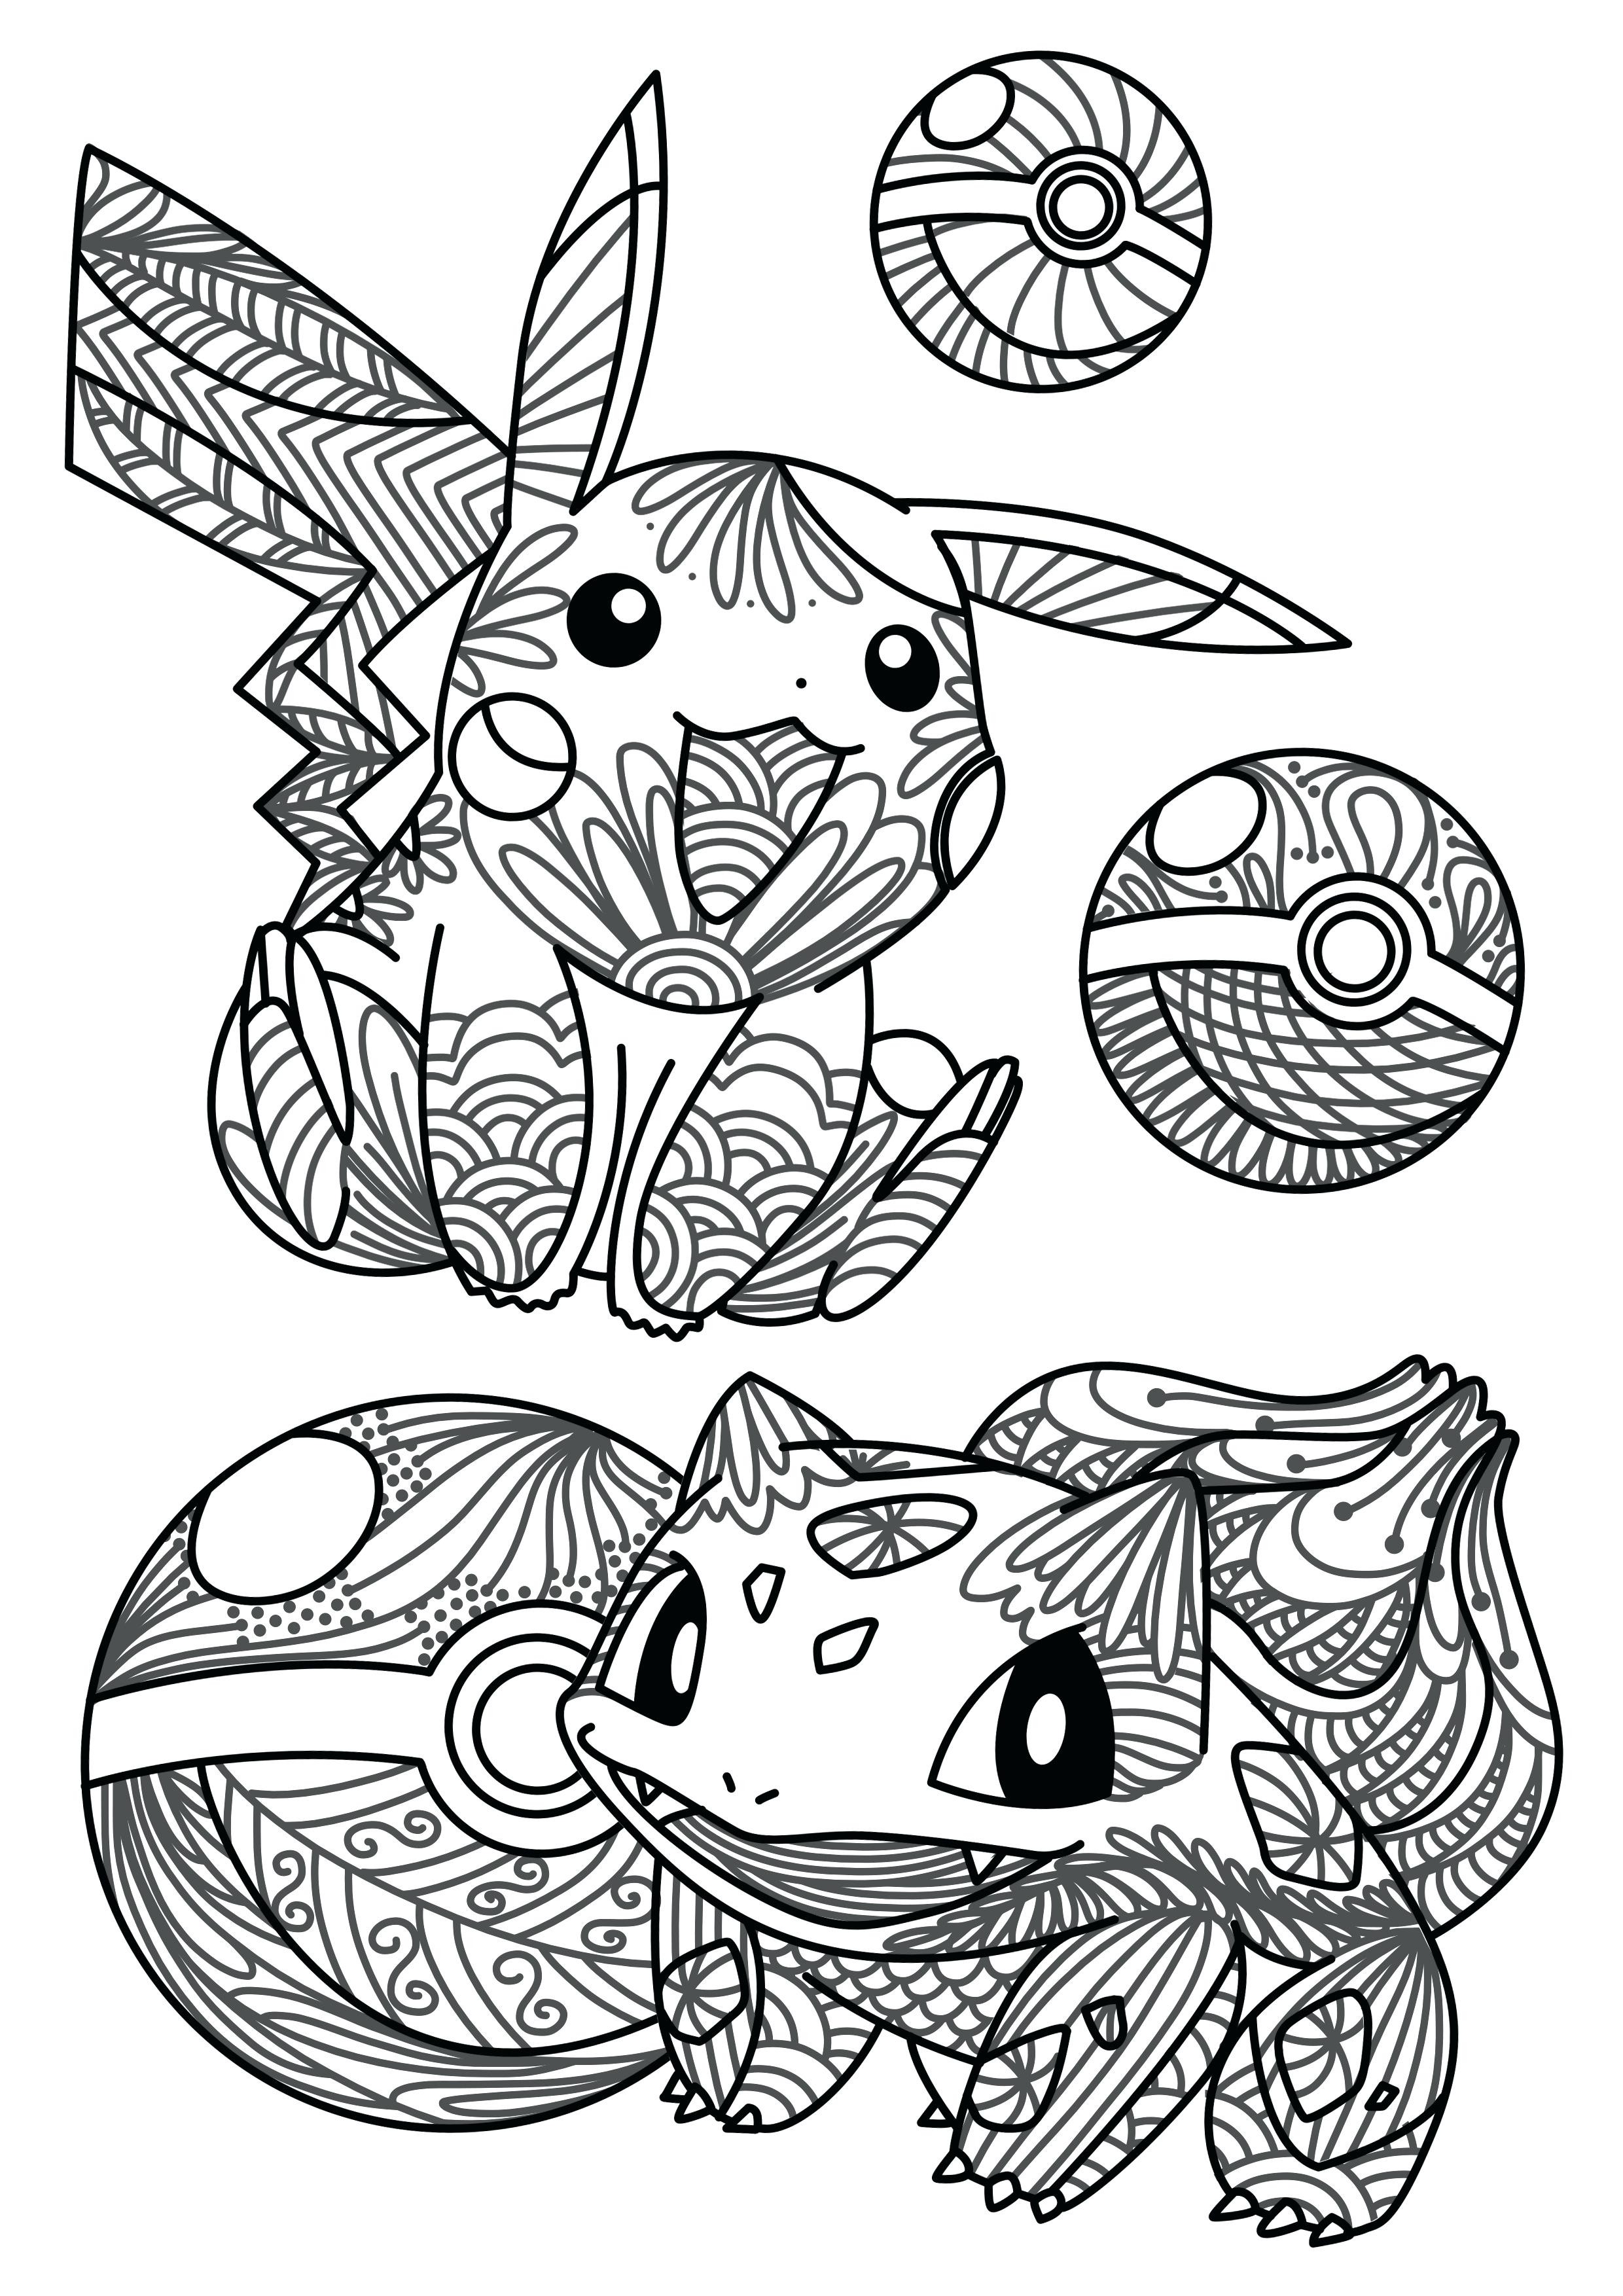 Cute Pokemon Coloring Pages at GetColorings.com | Free ...